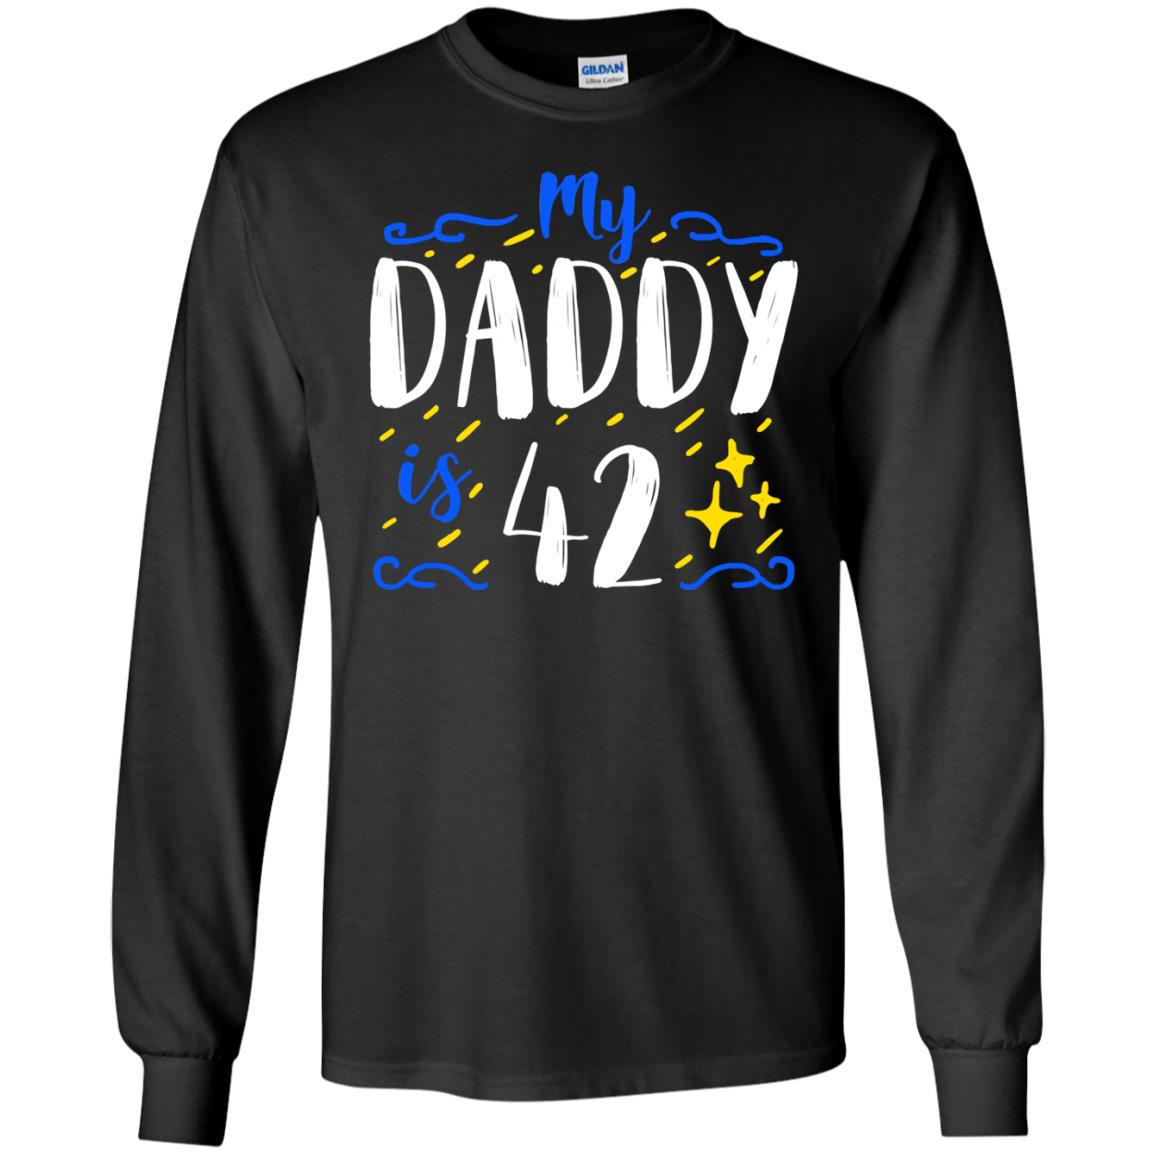 My Daddy Is 42 42nd Birthday Daddy Shirt For Sons Or DaughtersG240 Gildan LS Ultra Cotton T-Shirt